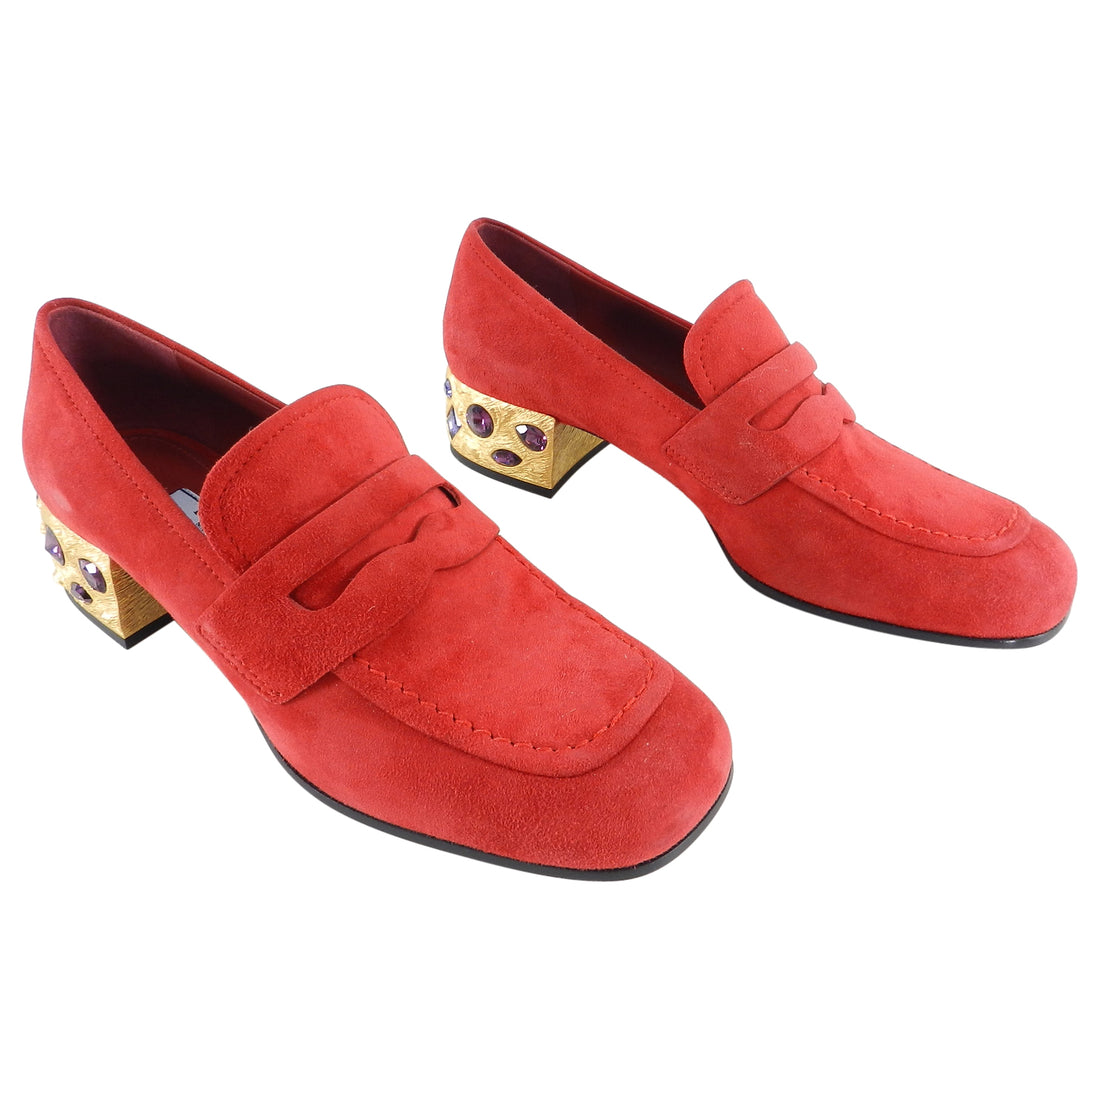 Prada Red Suede Loafer with Gold Metal Jewel Heels - 37.5